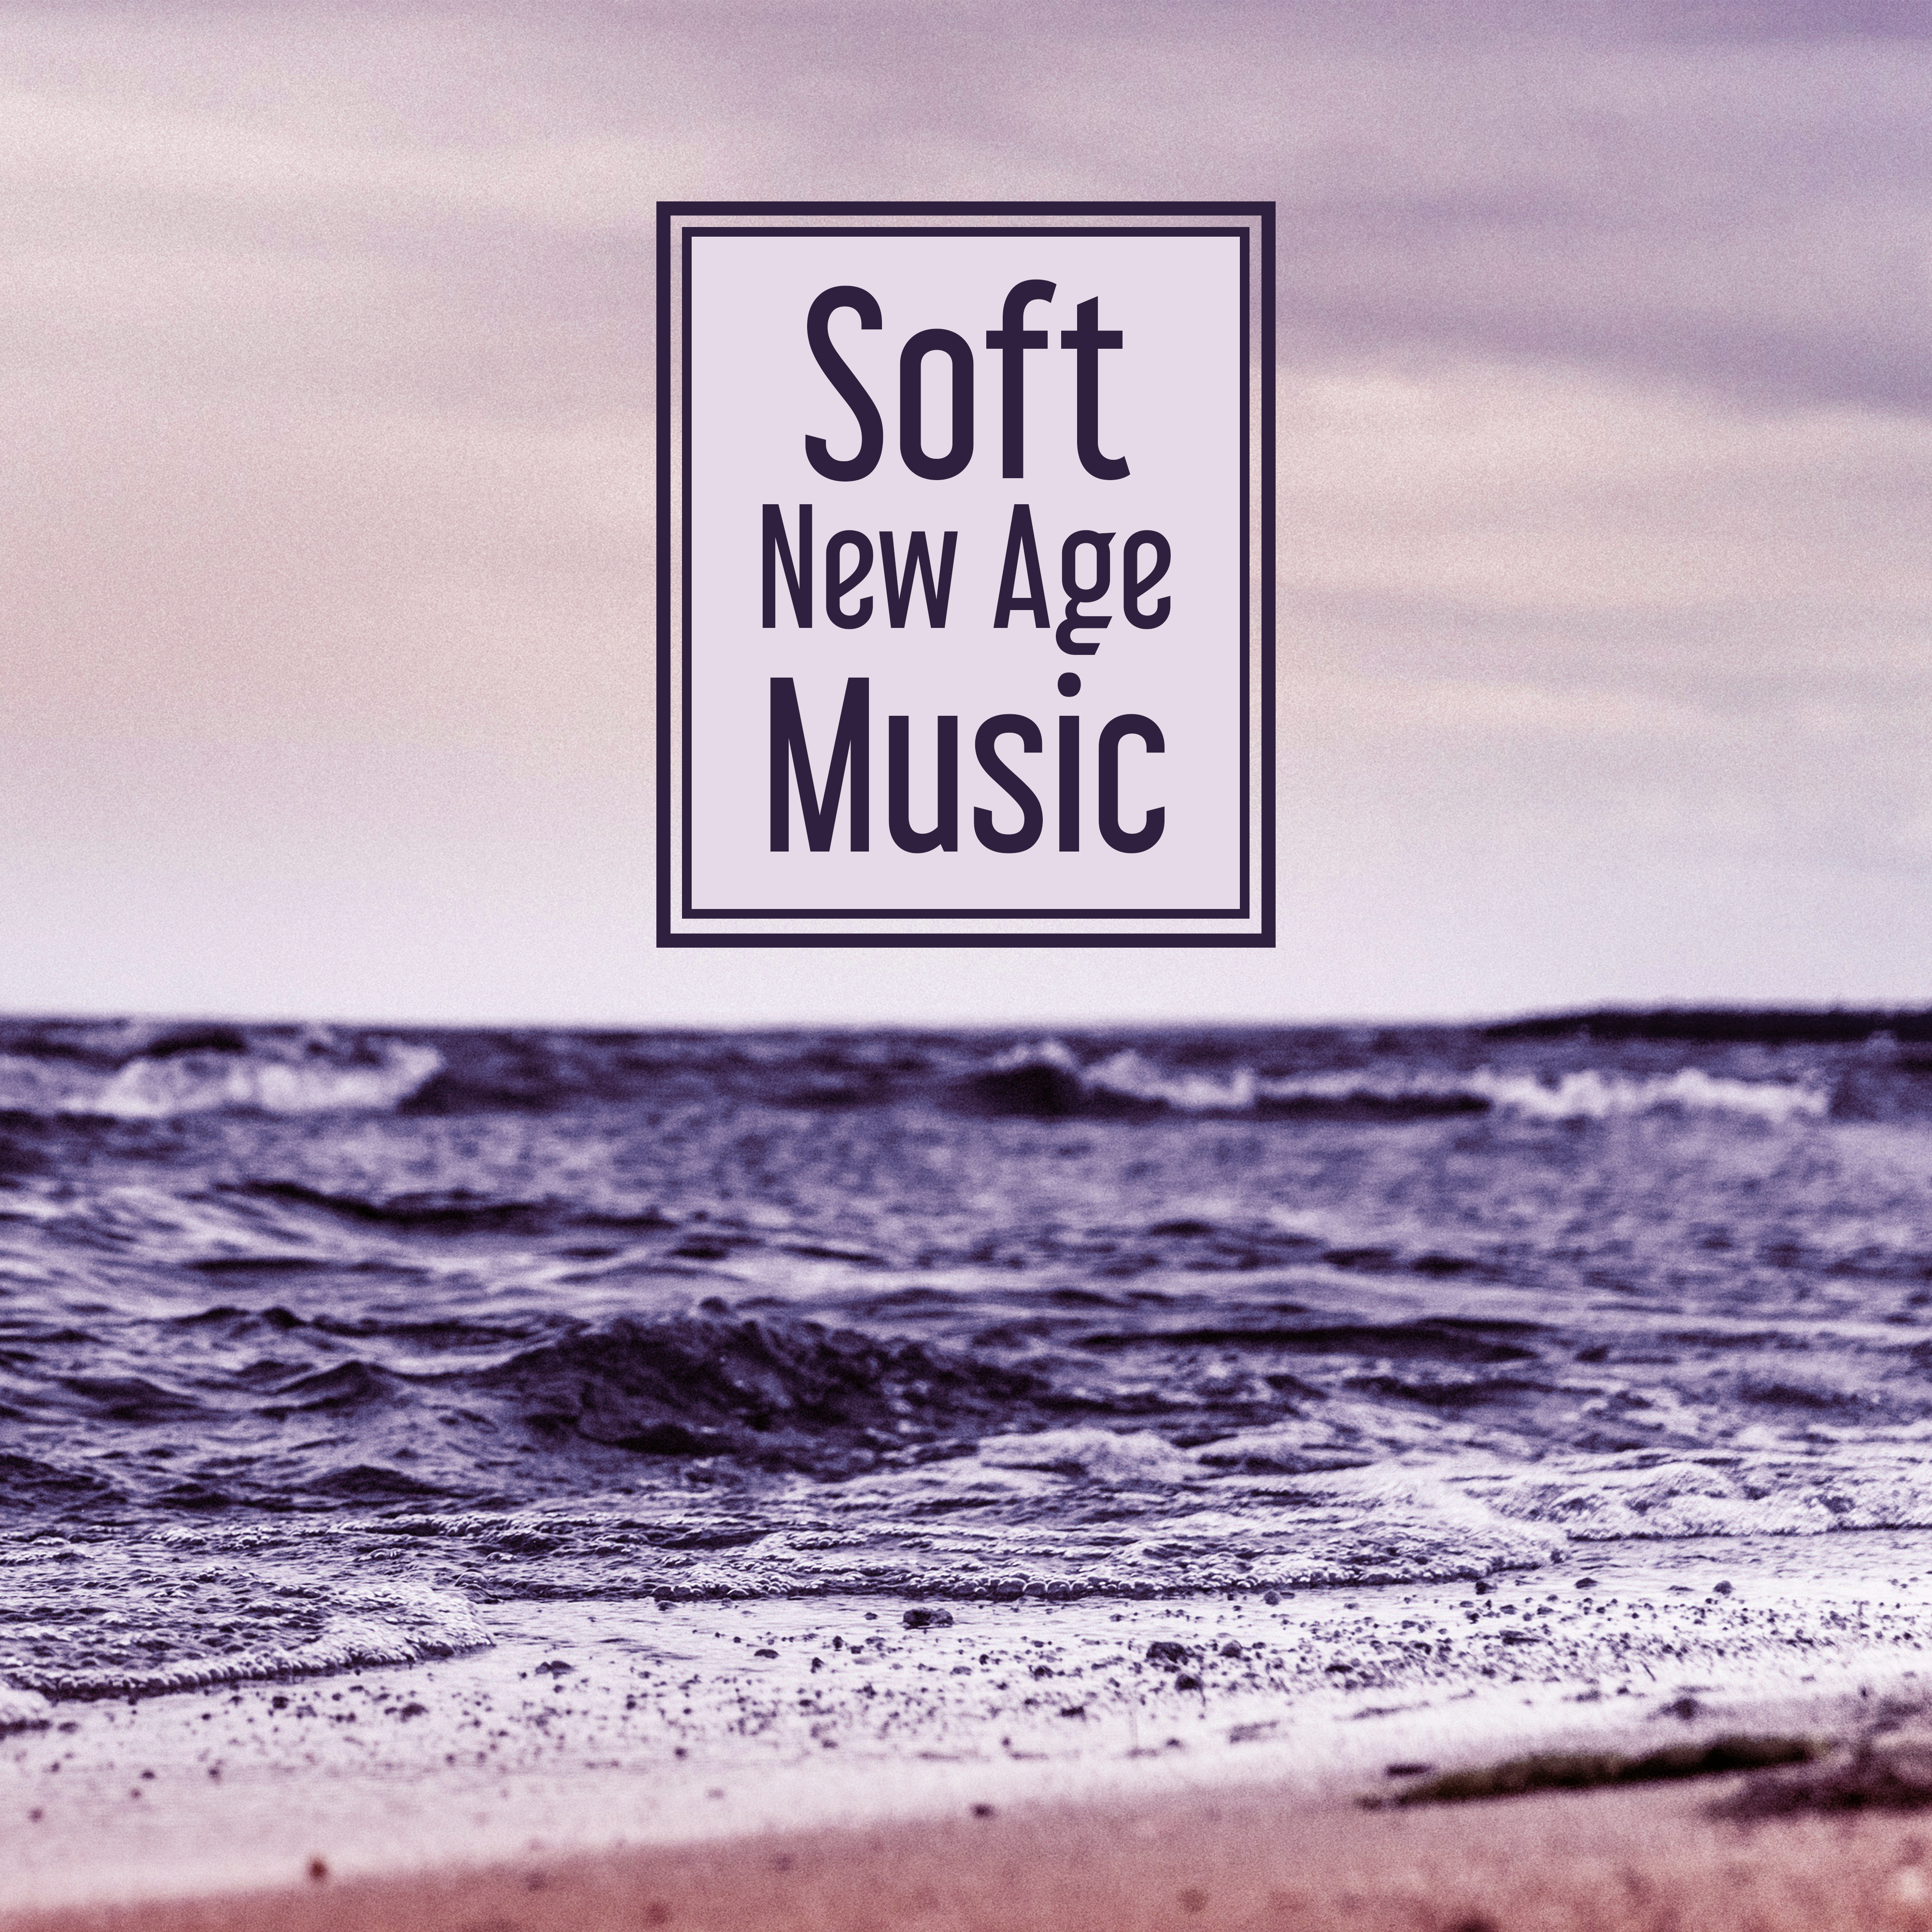 Soft New Age Music – Calming Sounds of Nature for Relax After Work, Reduce Stress